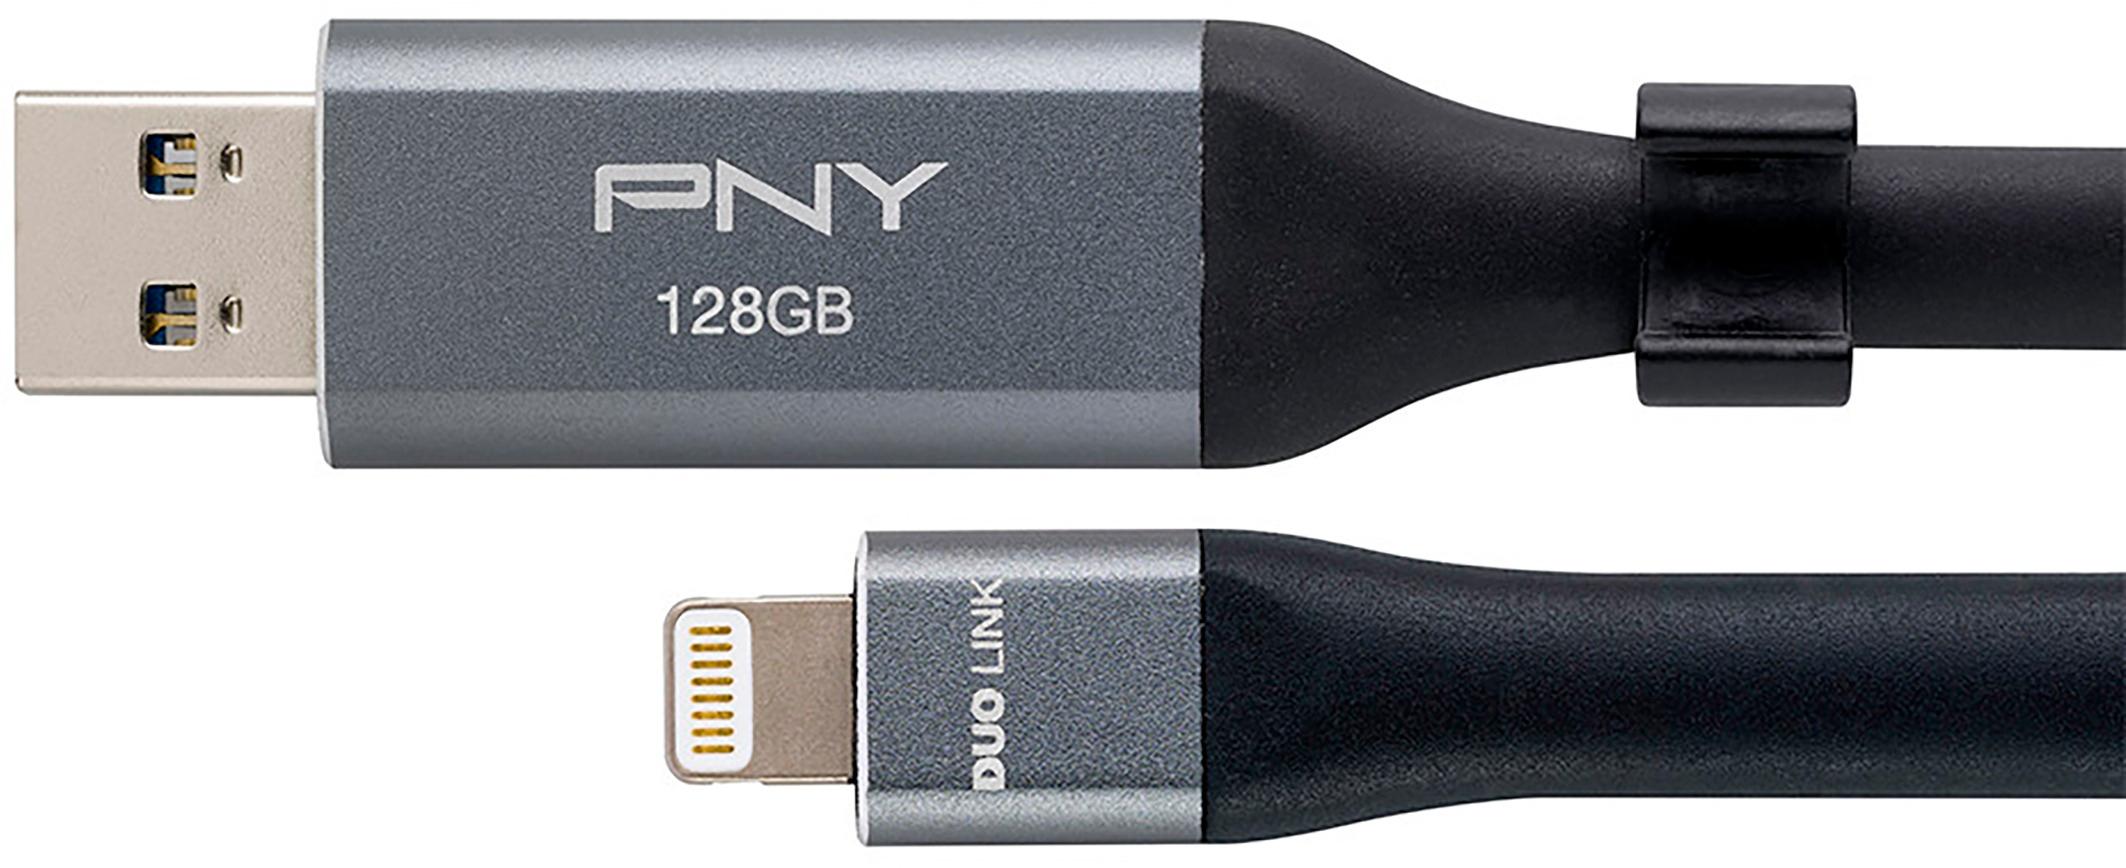 PNY DUO Link 128GB USB 3.0 OTG Flash Drive for and Computers P-FDI128LA02GC-RB Best Buy